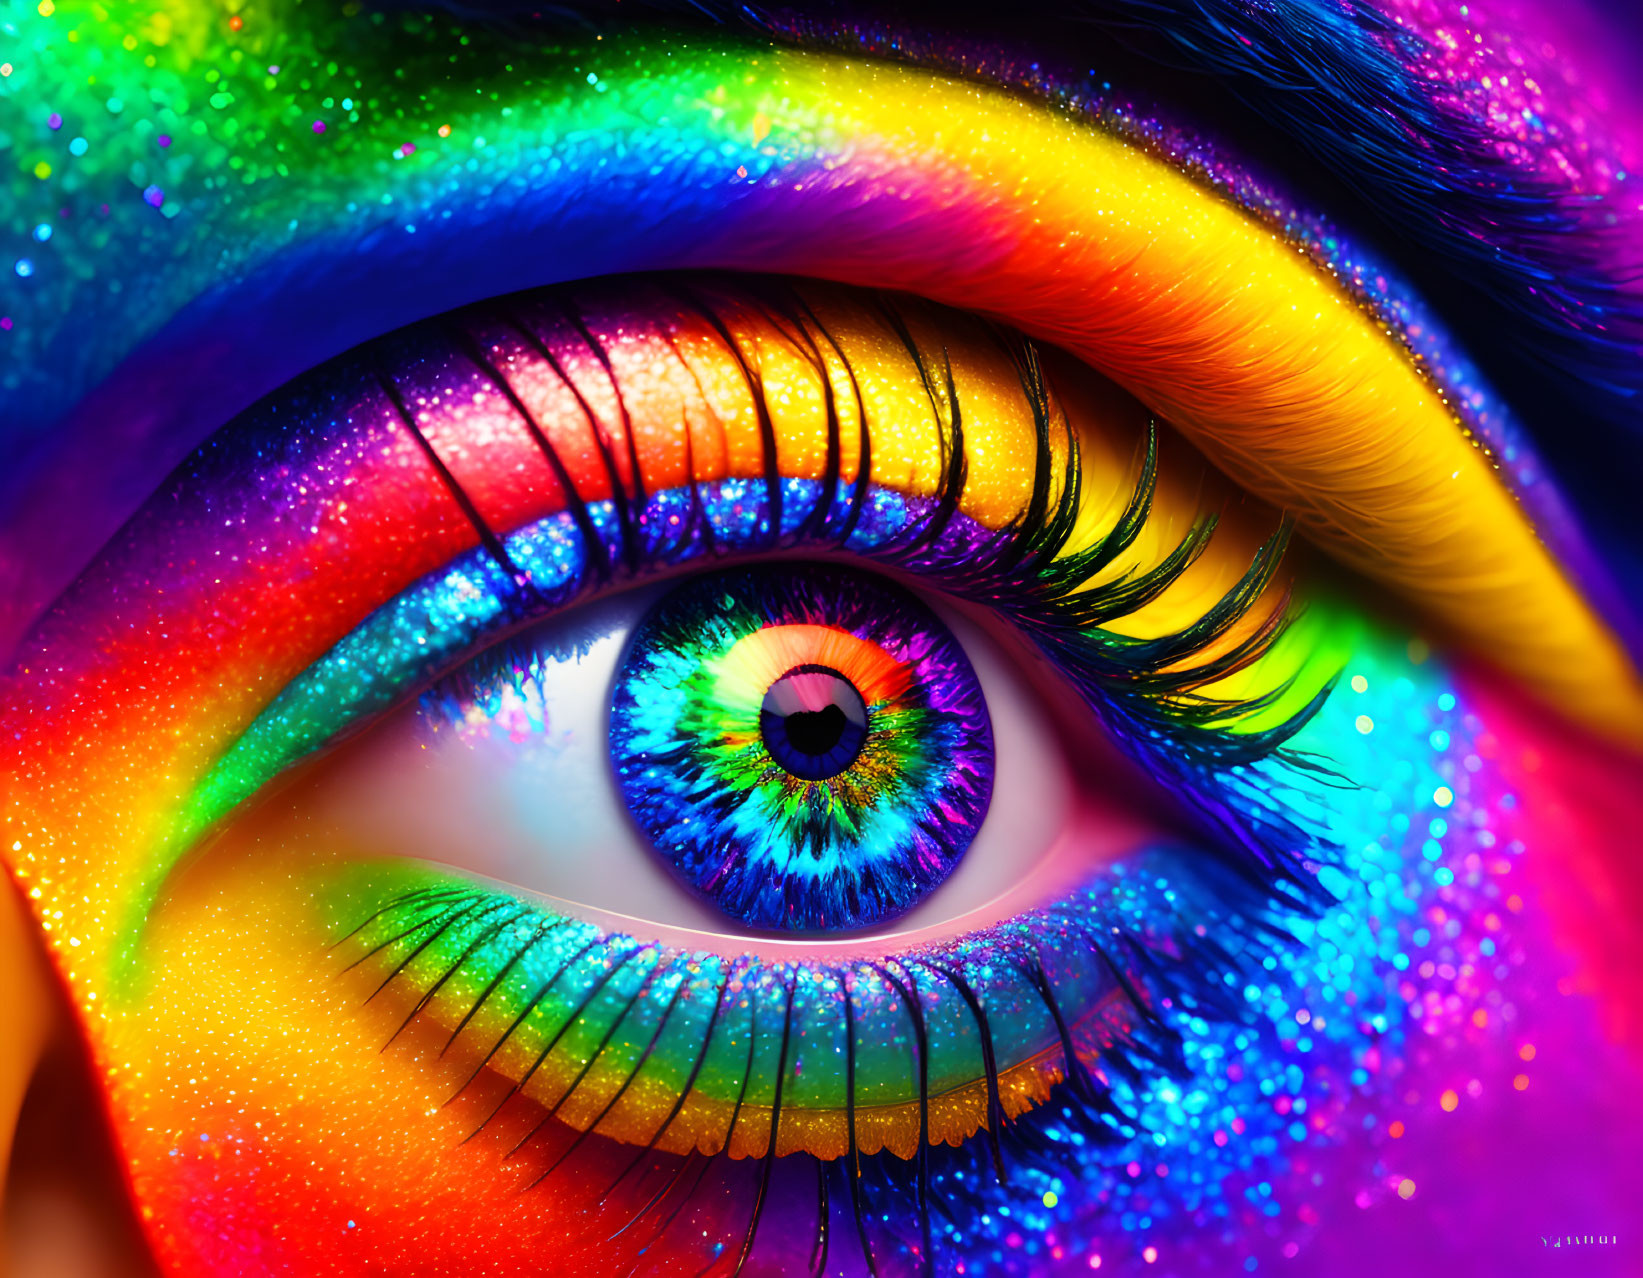  colorful eye of a woman